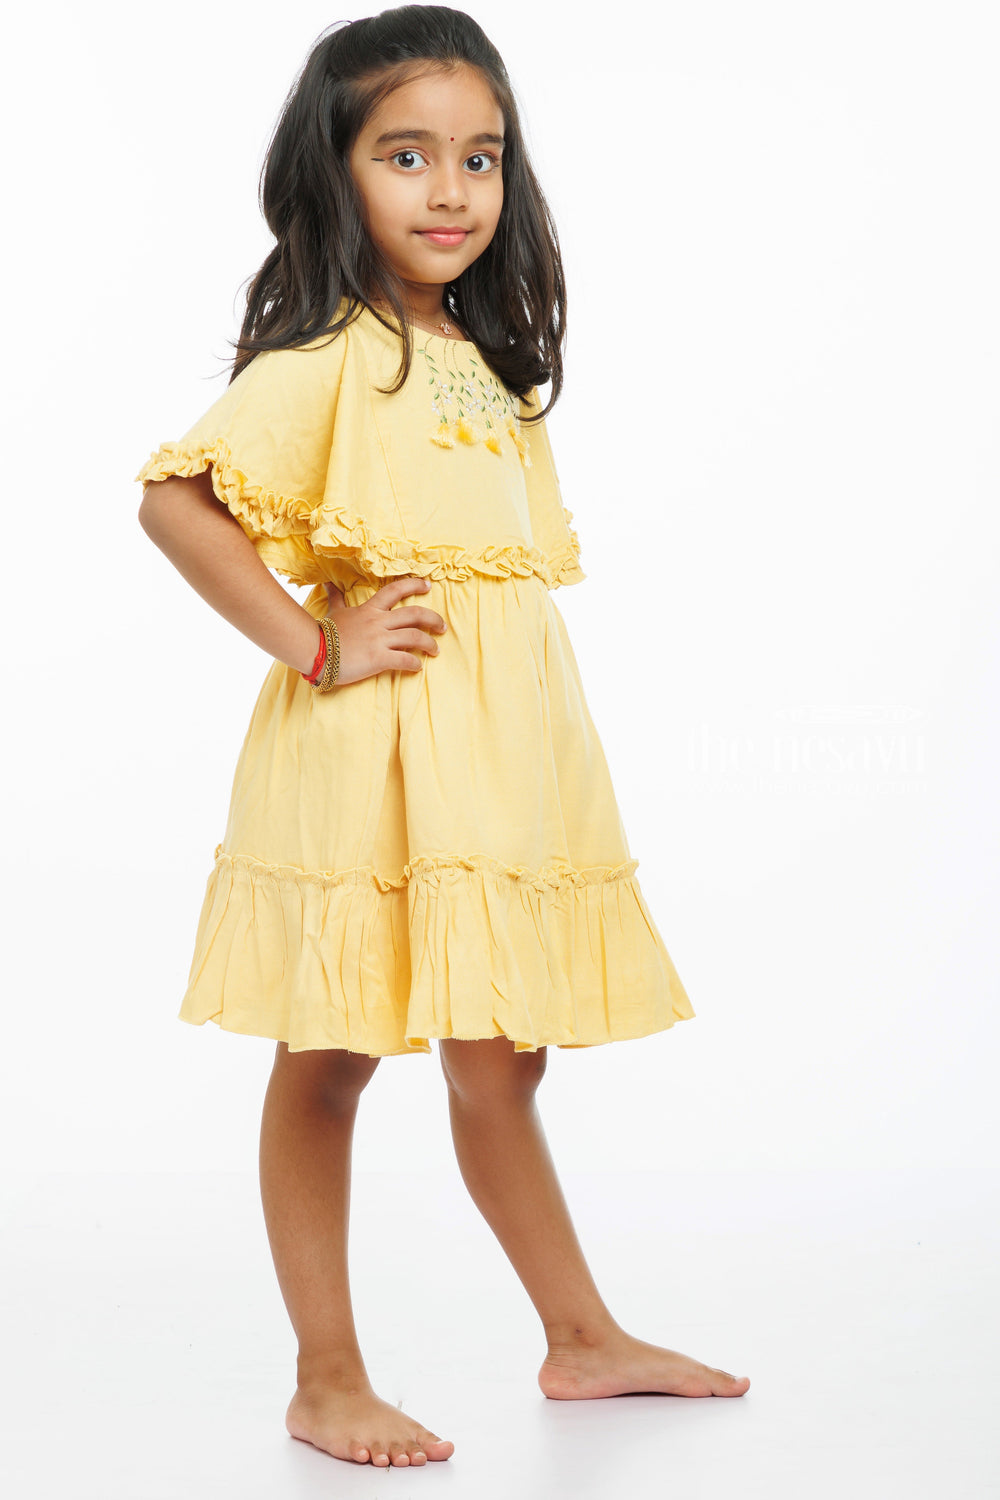 The Nesavu Girls Cotton Frock Sunshine Embrace: Chic Embroidered Knee-Length Frock for Sprightly Girls Nesavu Find the Perfect Embroidered Summer Frock for Girls | Shop the Latest | The Nesavu